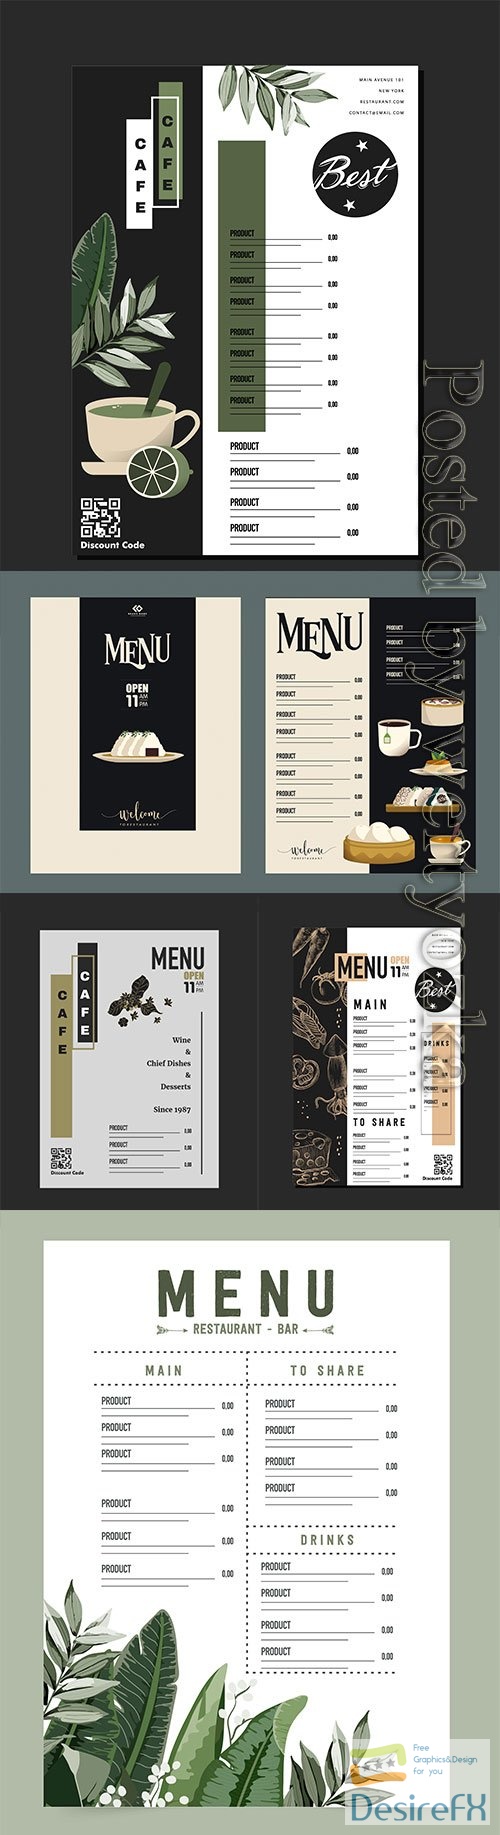 Menu for a cafe and restaurant with a beautiful design in vector